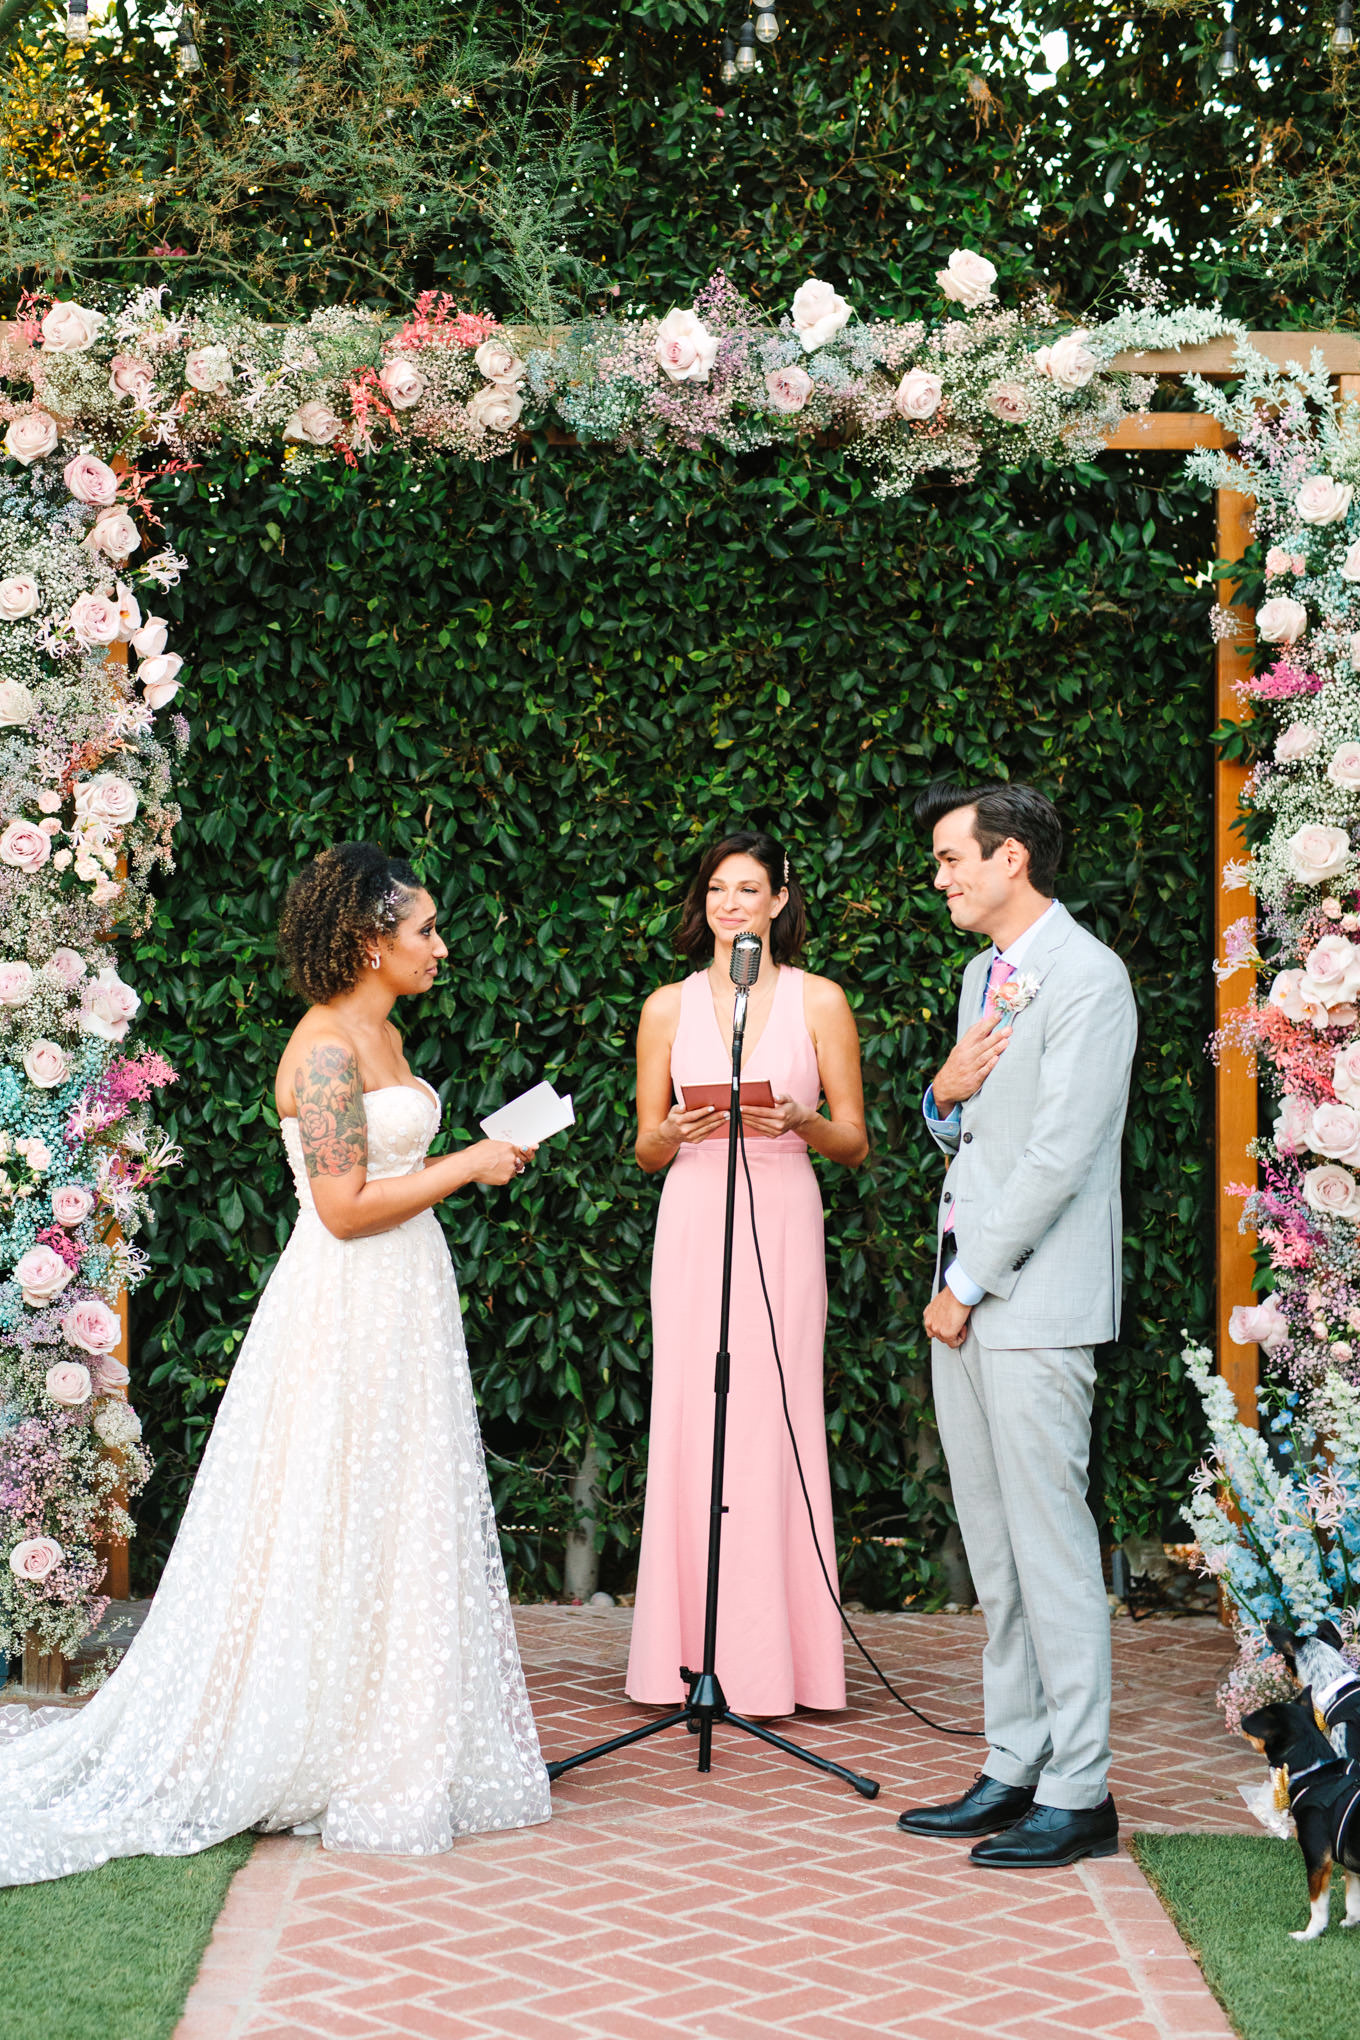 Bride and groom vow exchange | Colorful pop-up micro wedding at The Ruby Street Los Angeles featured on Green Wedding Shoes | Colorful and elevated photography for fun-loving couples in Southern California | #colorfulwedding #popupwedding #weddingphotography #microwedding Source: Mary Costa Photography | Los Angeles